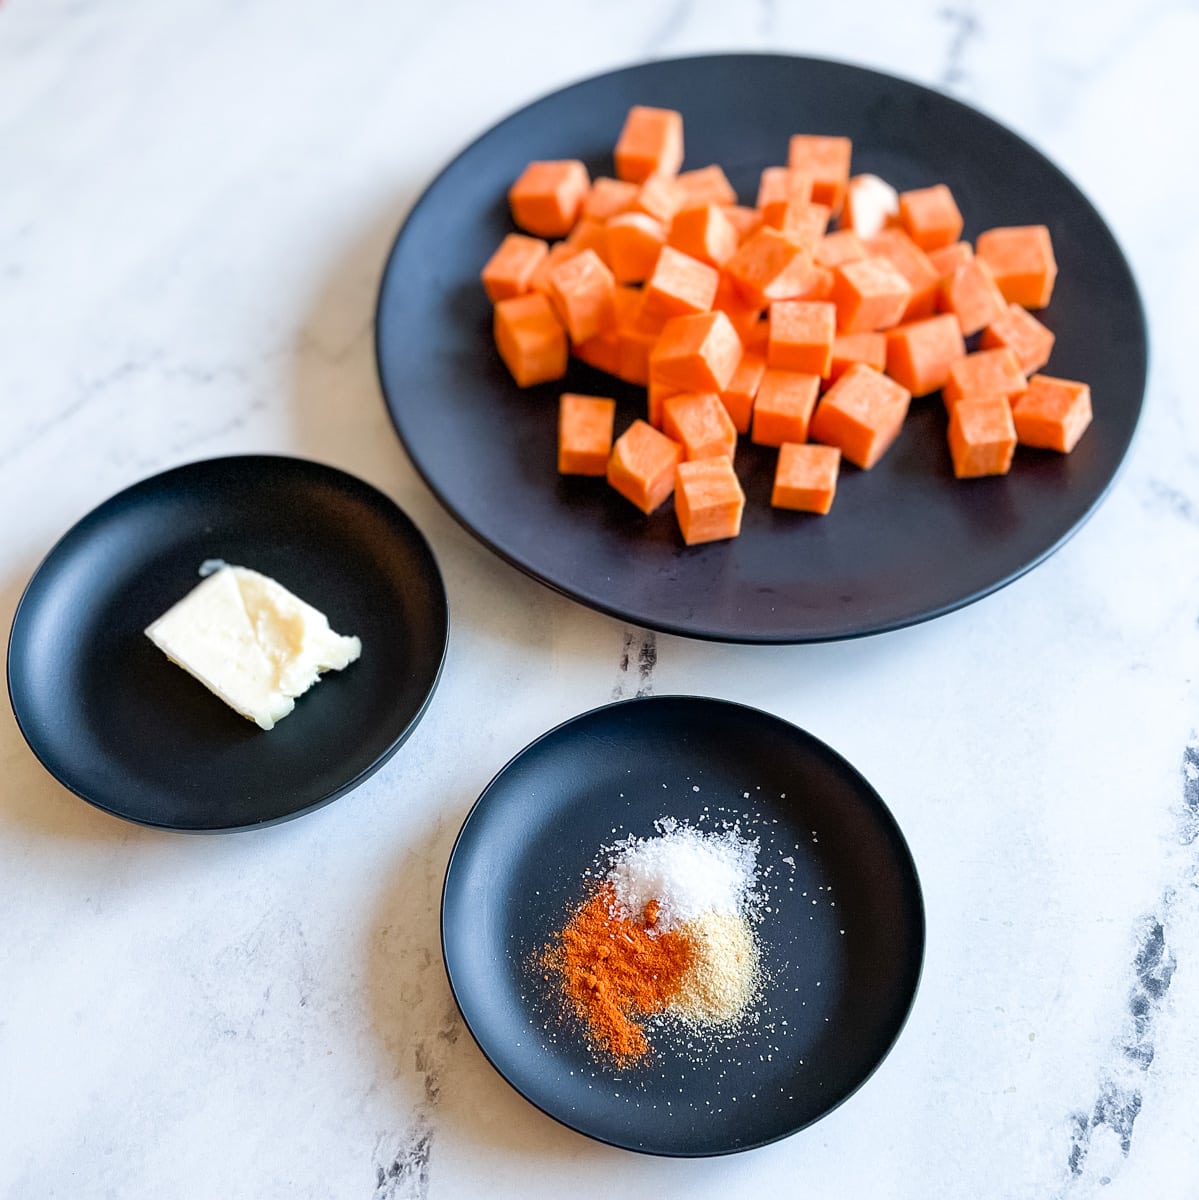 A large black plate with cubed sweet potatoes, a small black plate with a pat of butter, and a small black plate with cayenne, garlic powder, and salt sit on a white marble counter top